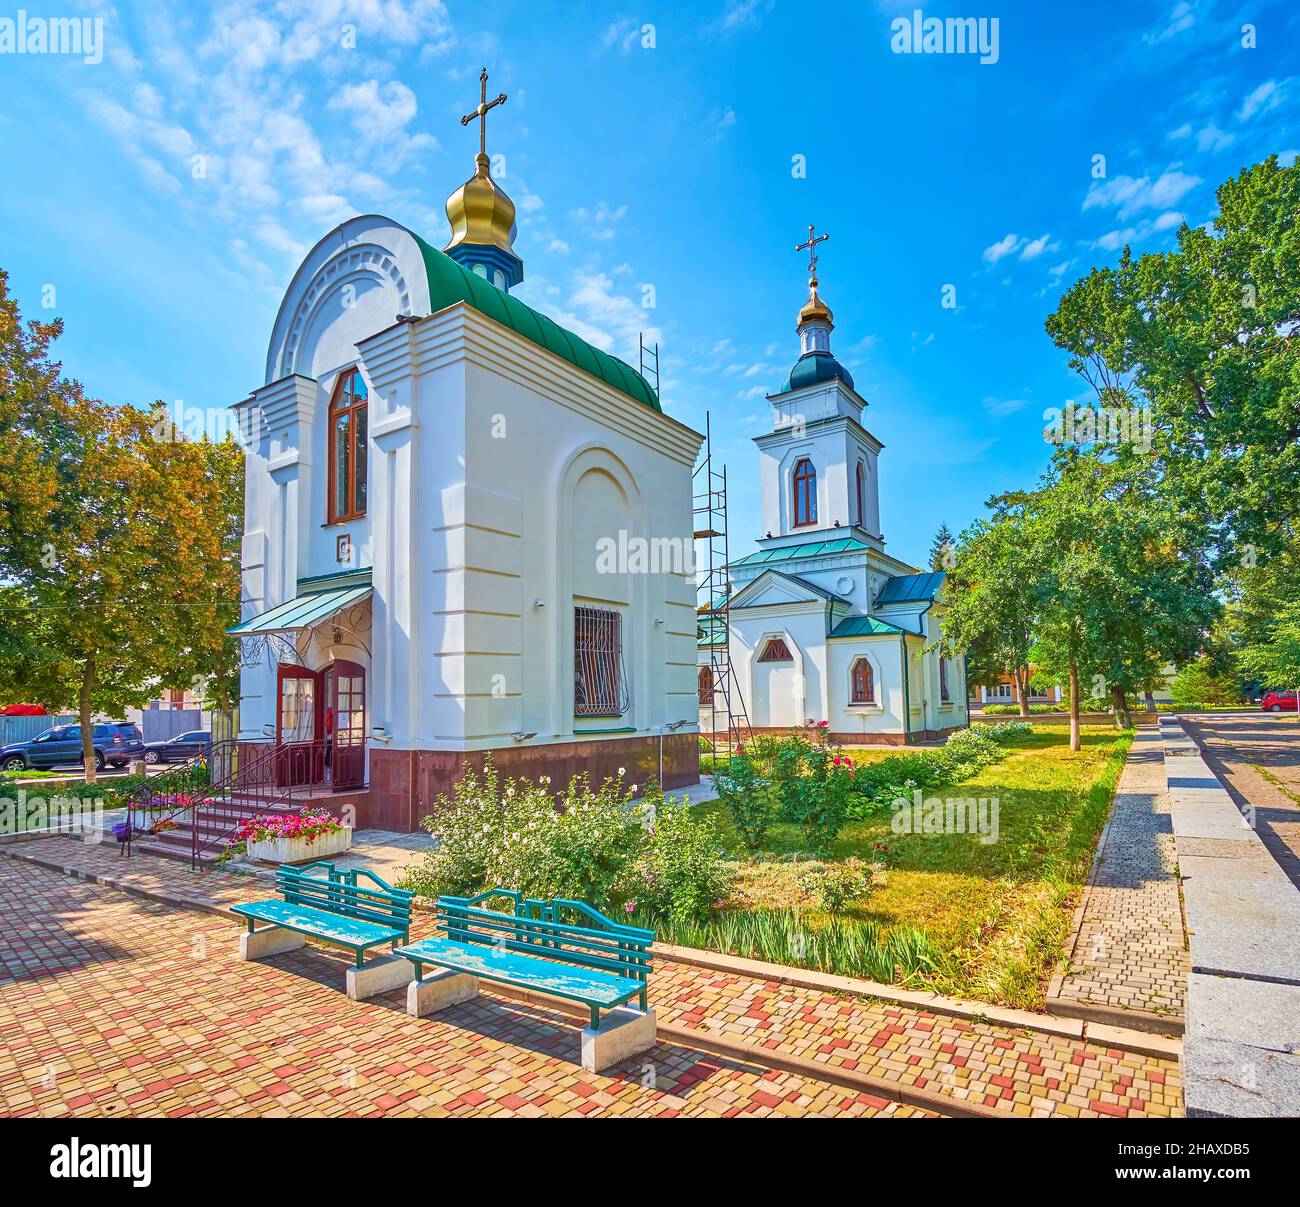 The restored bell tower and small chapel of Church of the Savior, one of the most notable historical landmarlk of Poltava, Ukraine Stock Photo